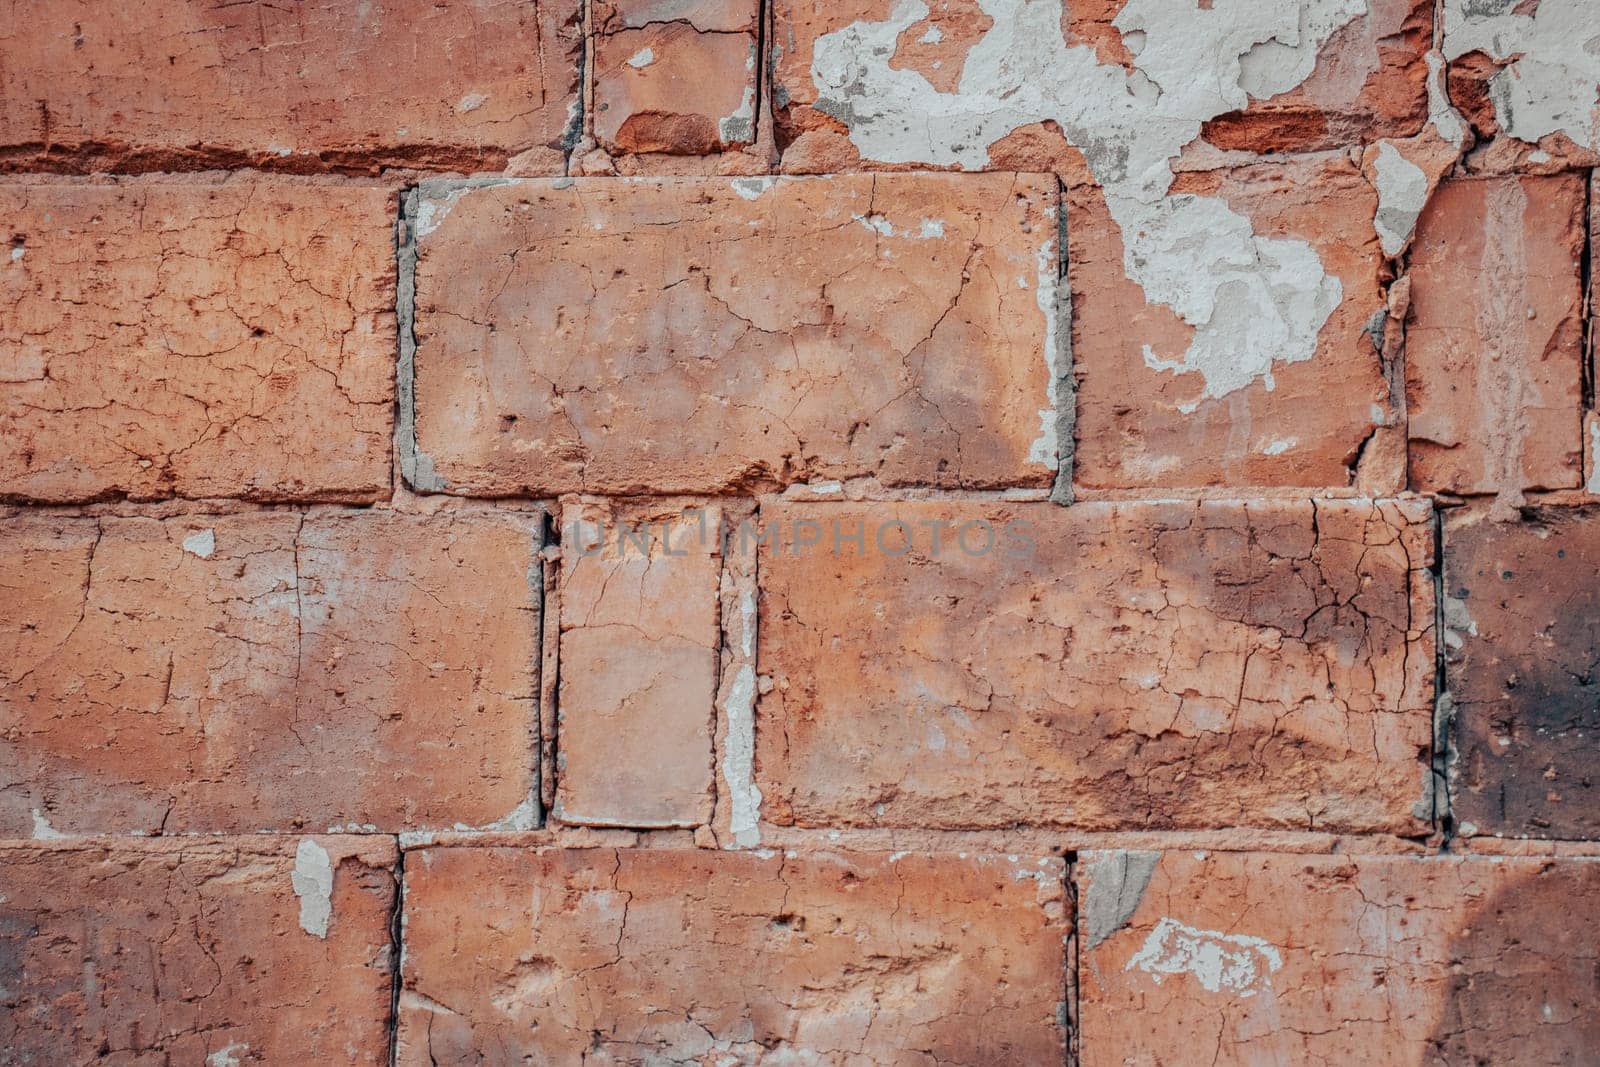 Close up red brick texture wall concept photo. Brick walls old architecture, urban city life by _Nataly_Nati_